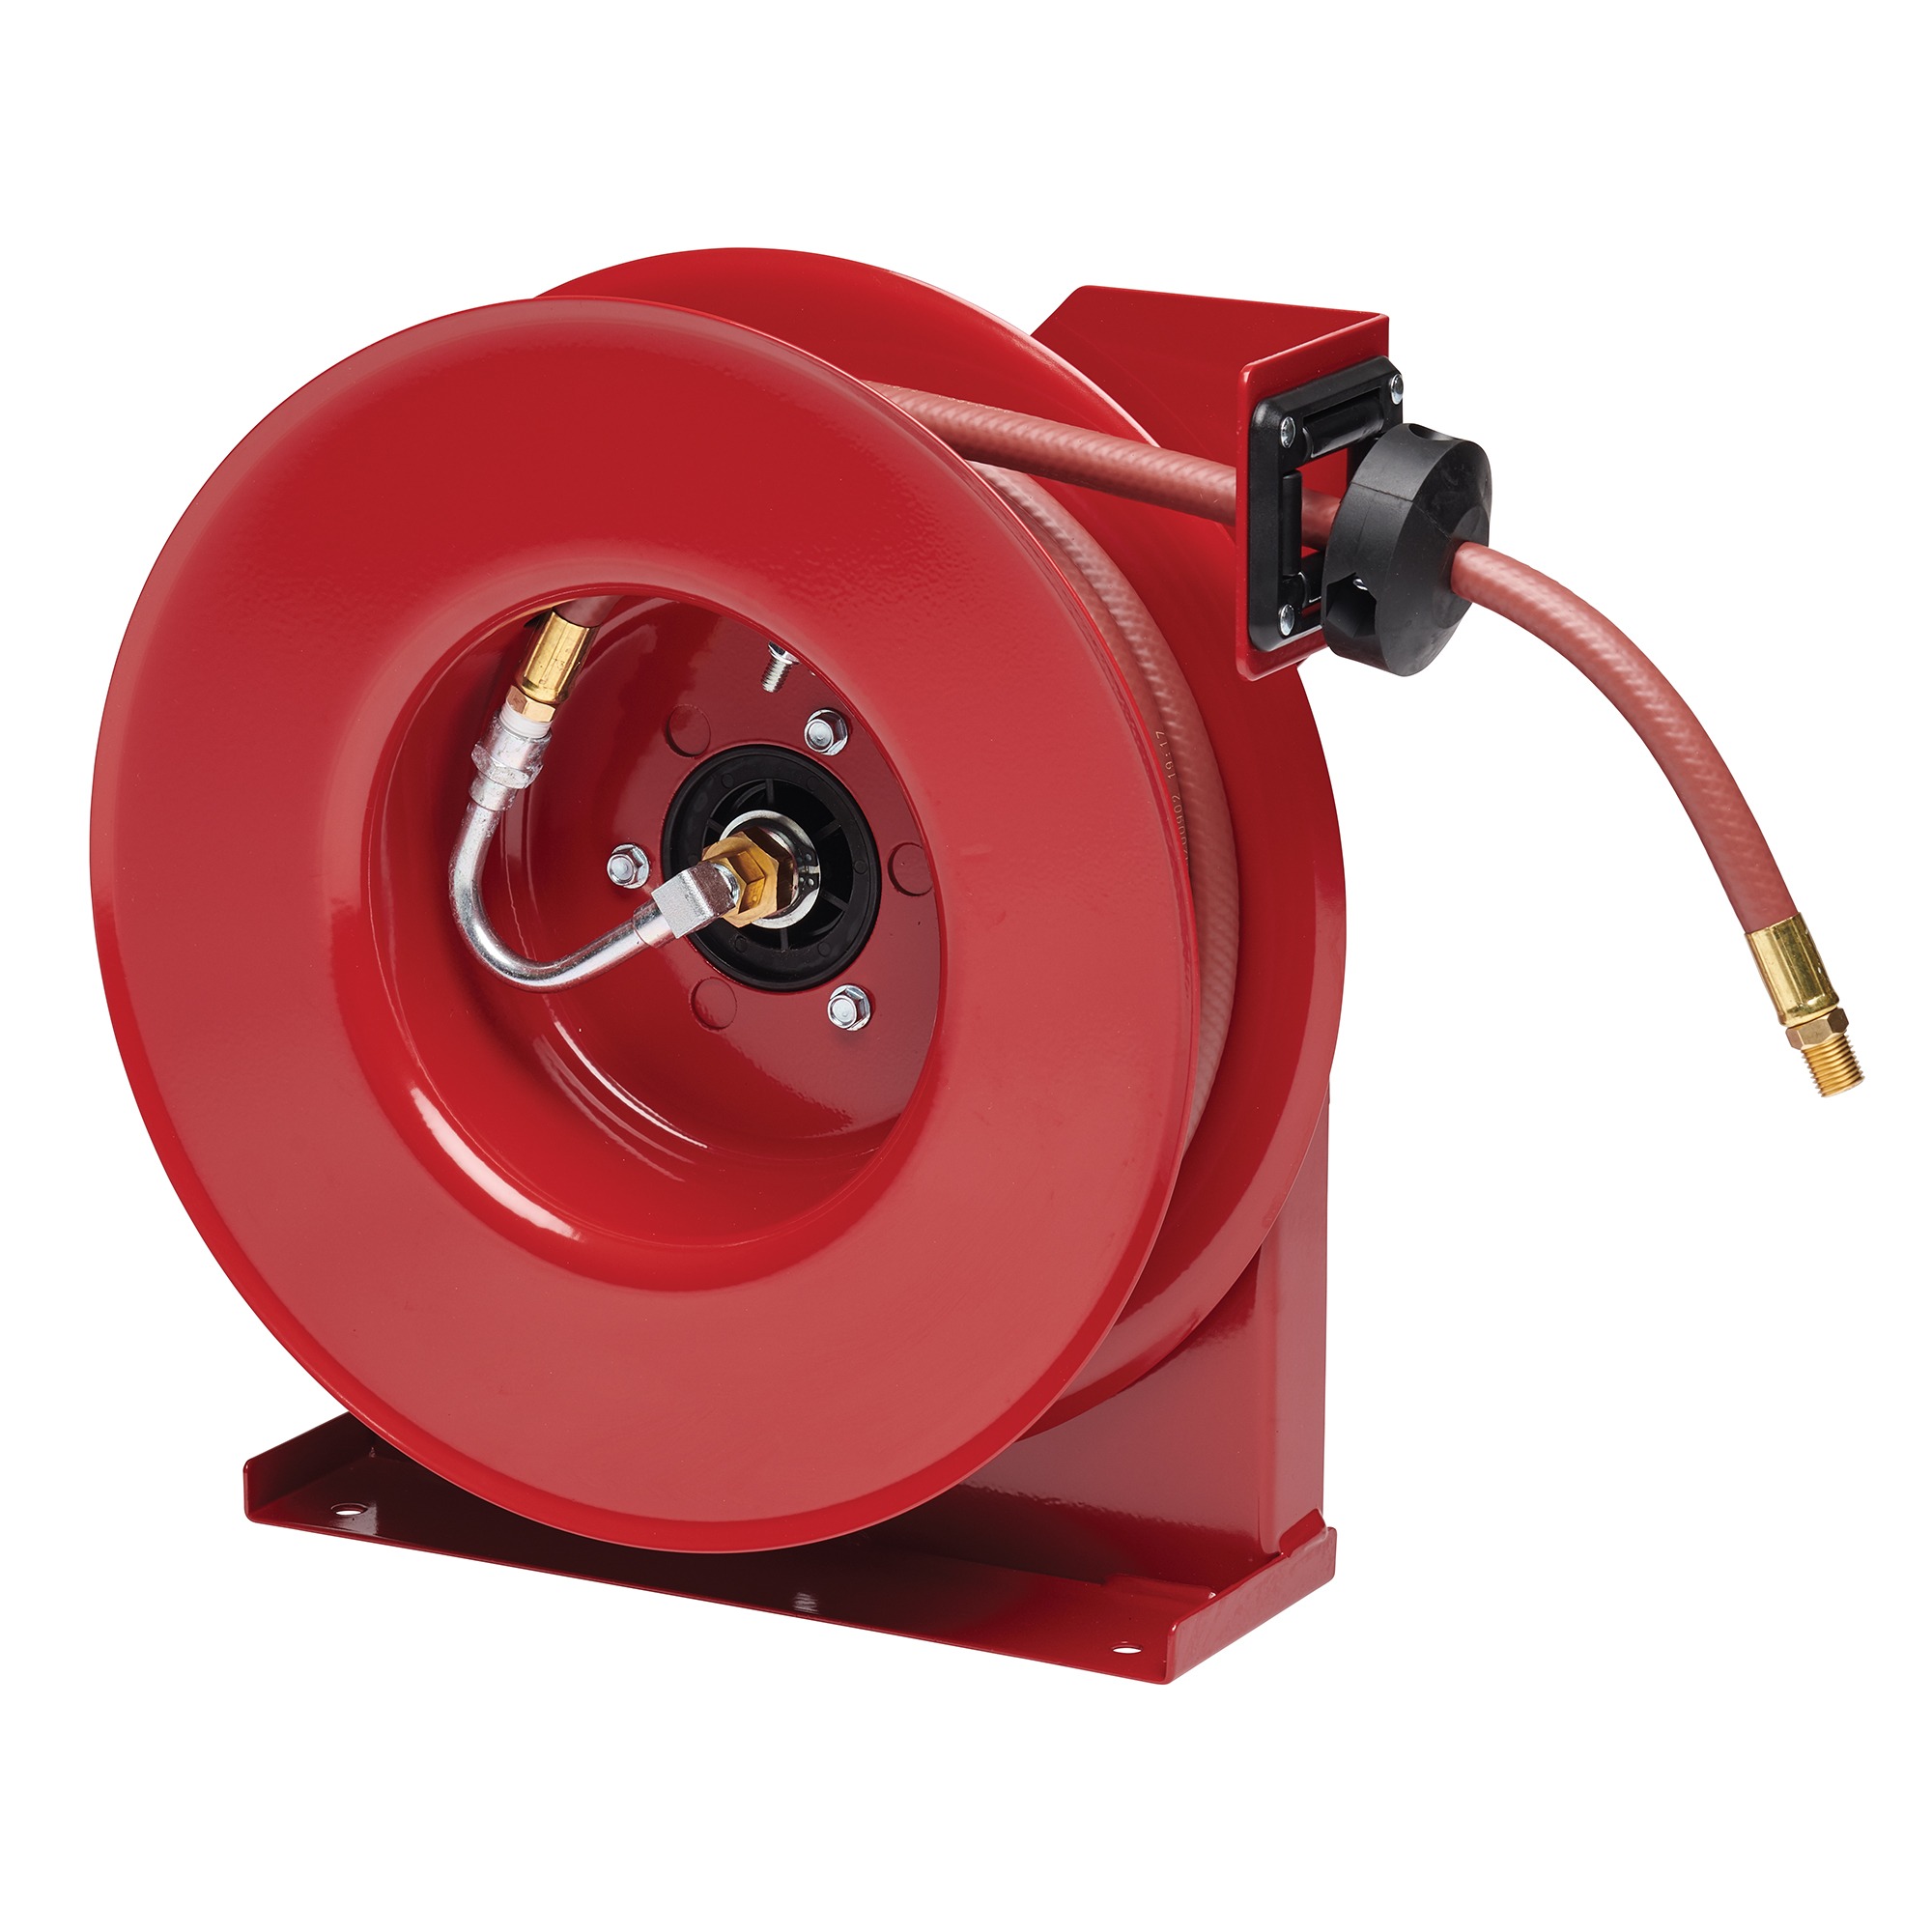 Reelcraft A5825 OLP - 1/2 in. x 25 ft. Premium Duty Hose Reel